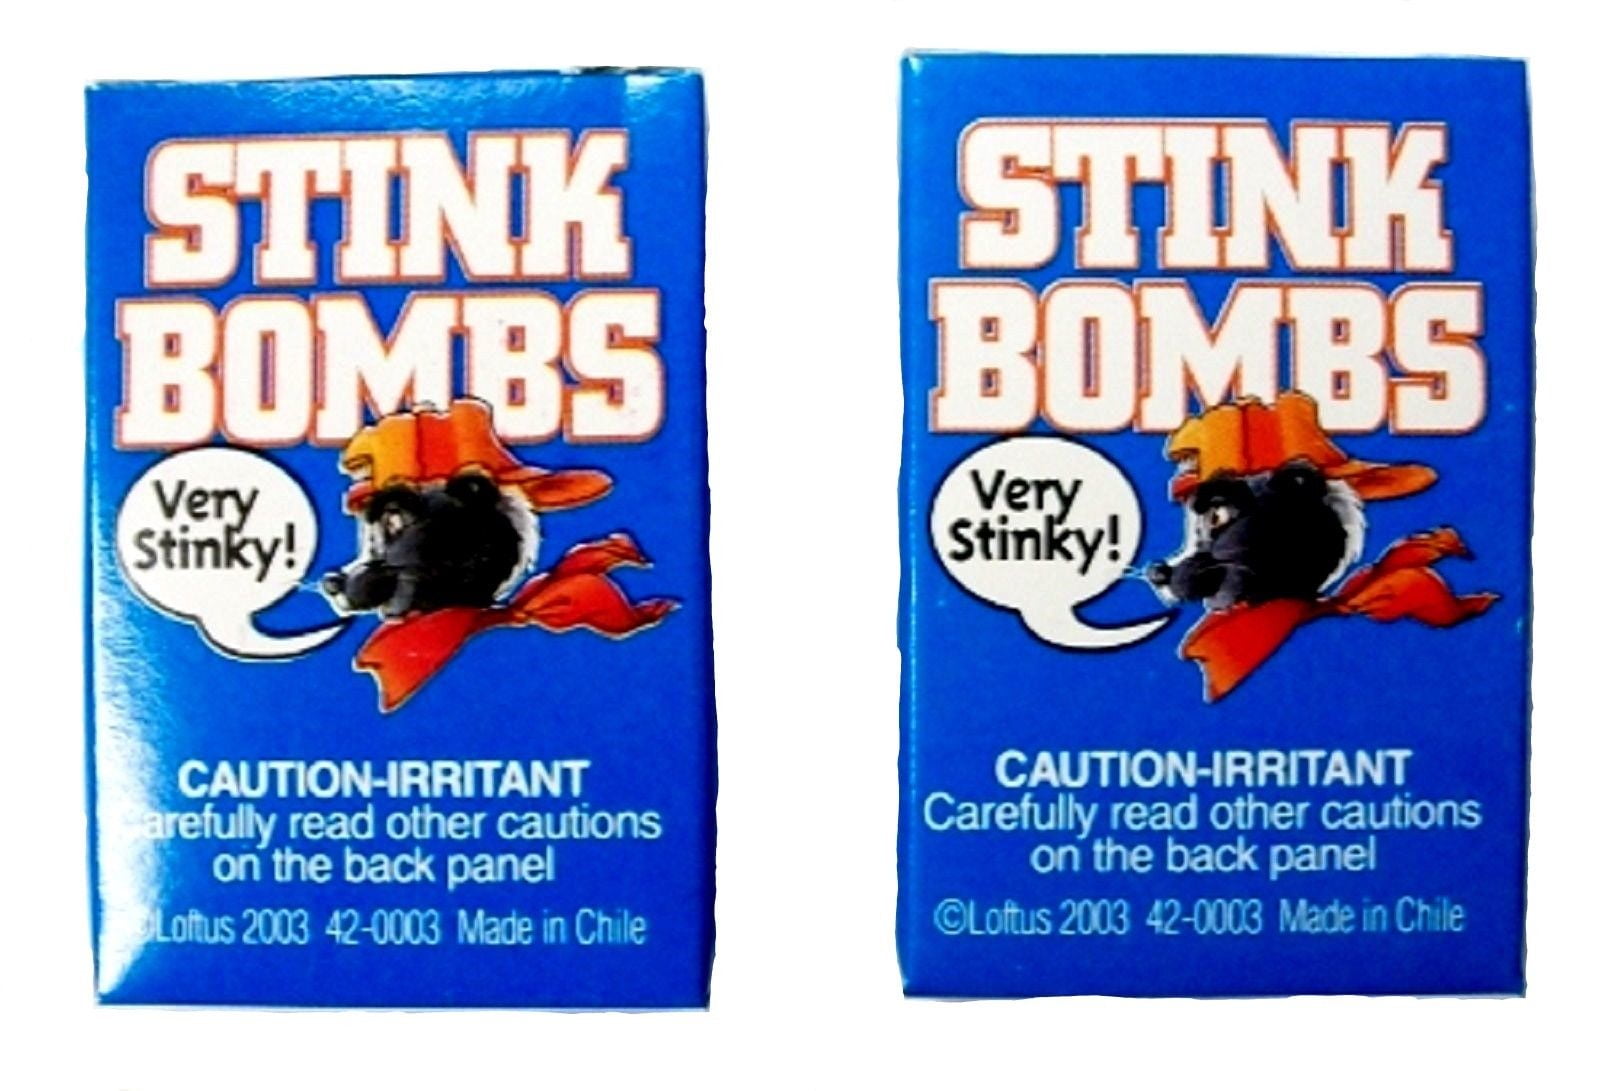 36 STINK BOMBS JOKE SHOP PRANKS 12 BOXES OF 3 BOMBS SMELLS OF FARTS ROTTEN EGGS 